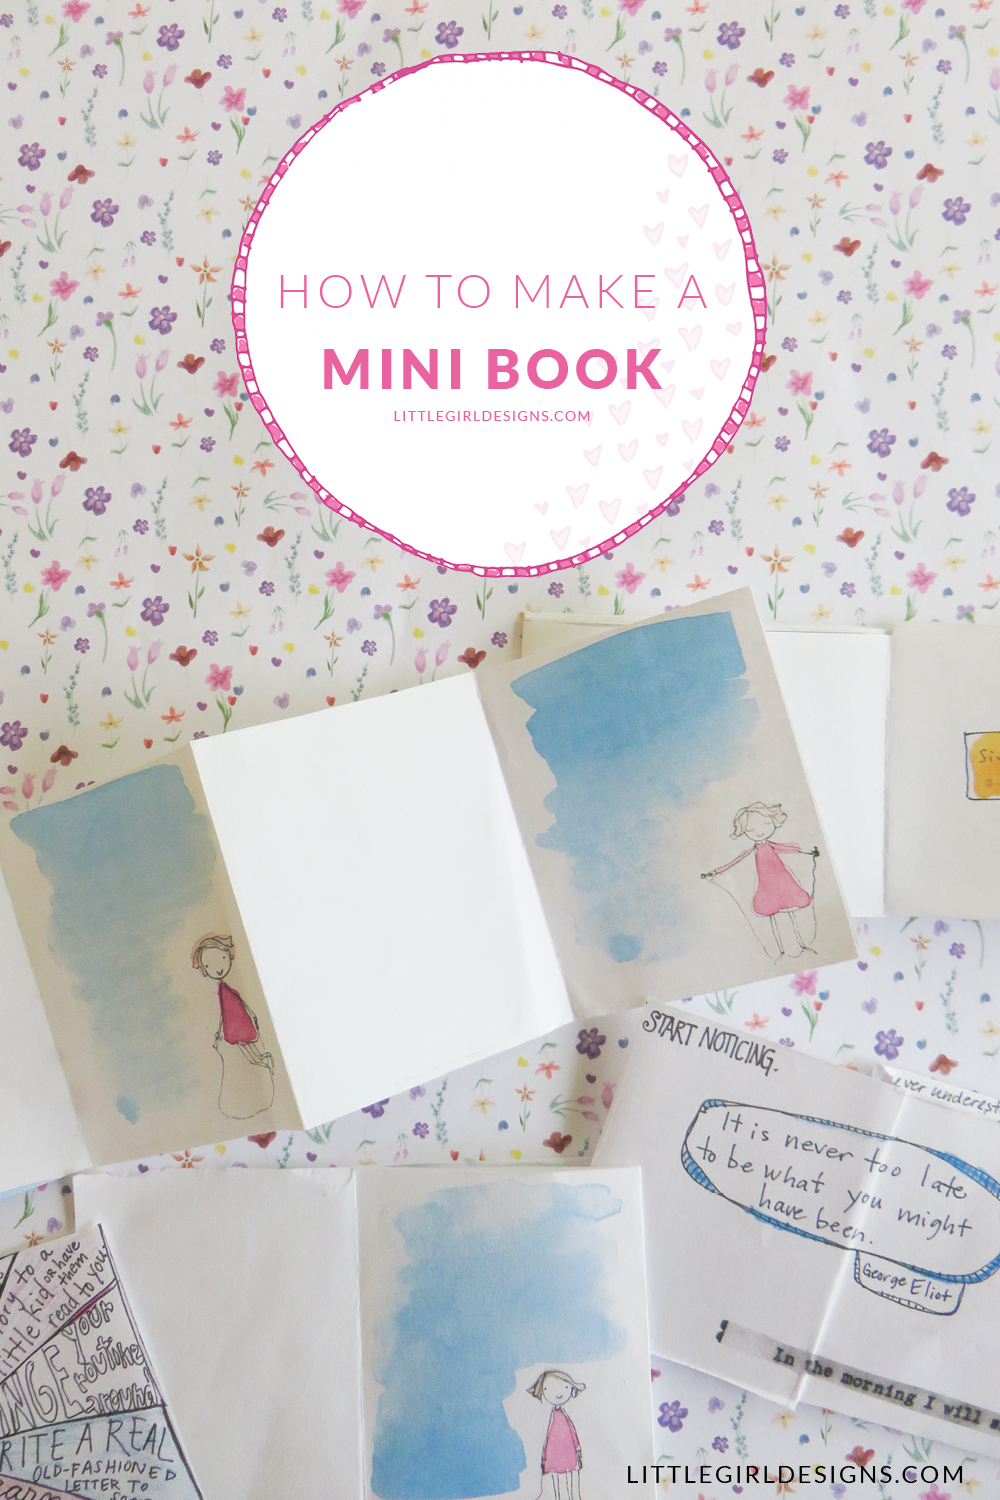 How to Make a Mini Book - making a mini accordion book isn't that difficult. I'll show how to make one today @littlegirldesigns.com